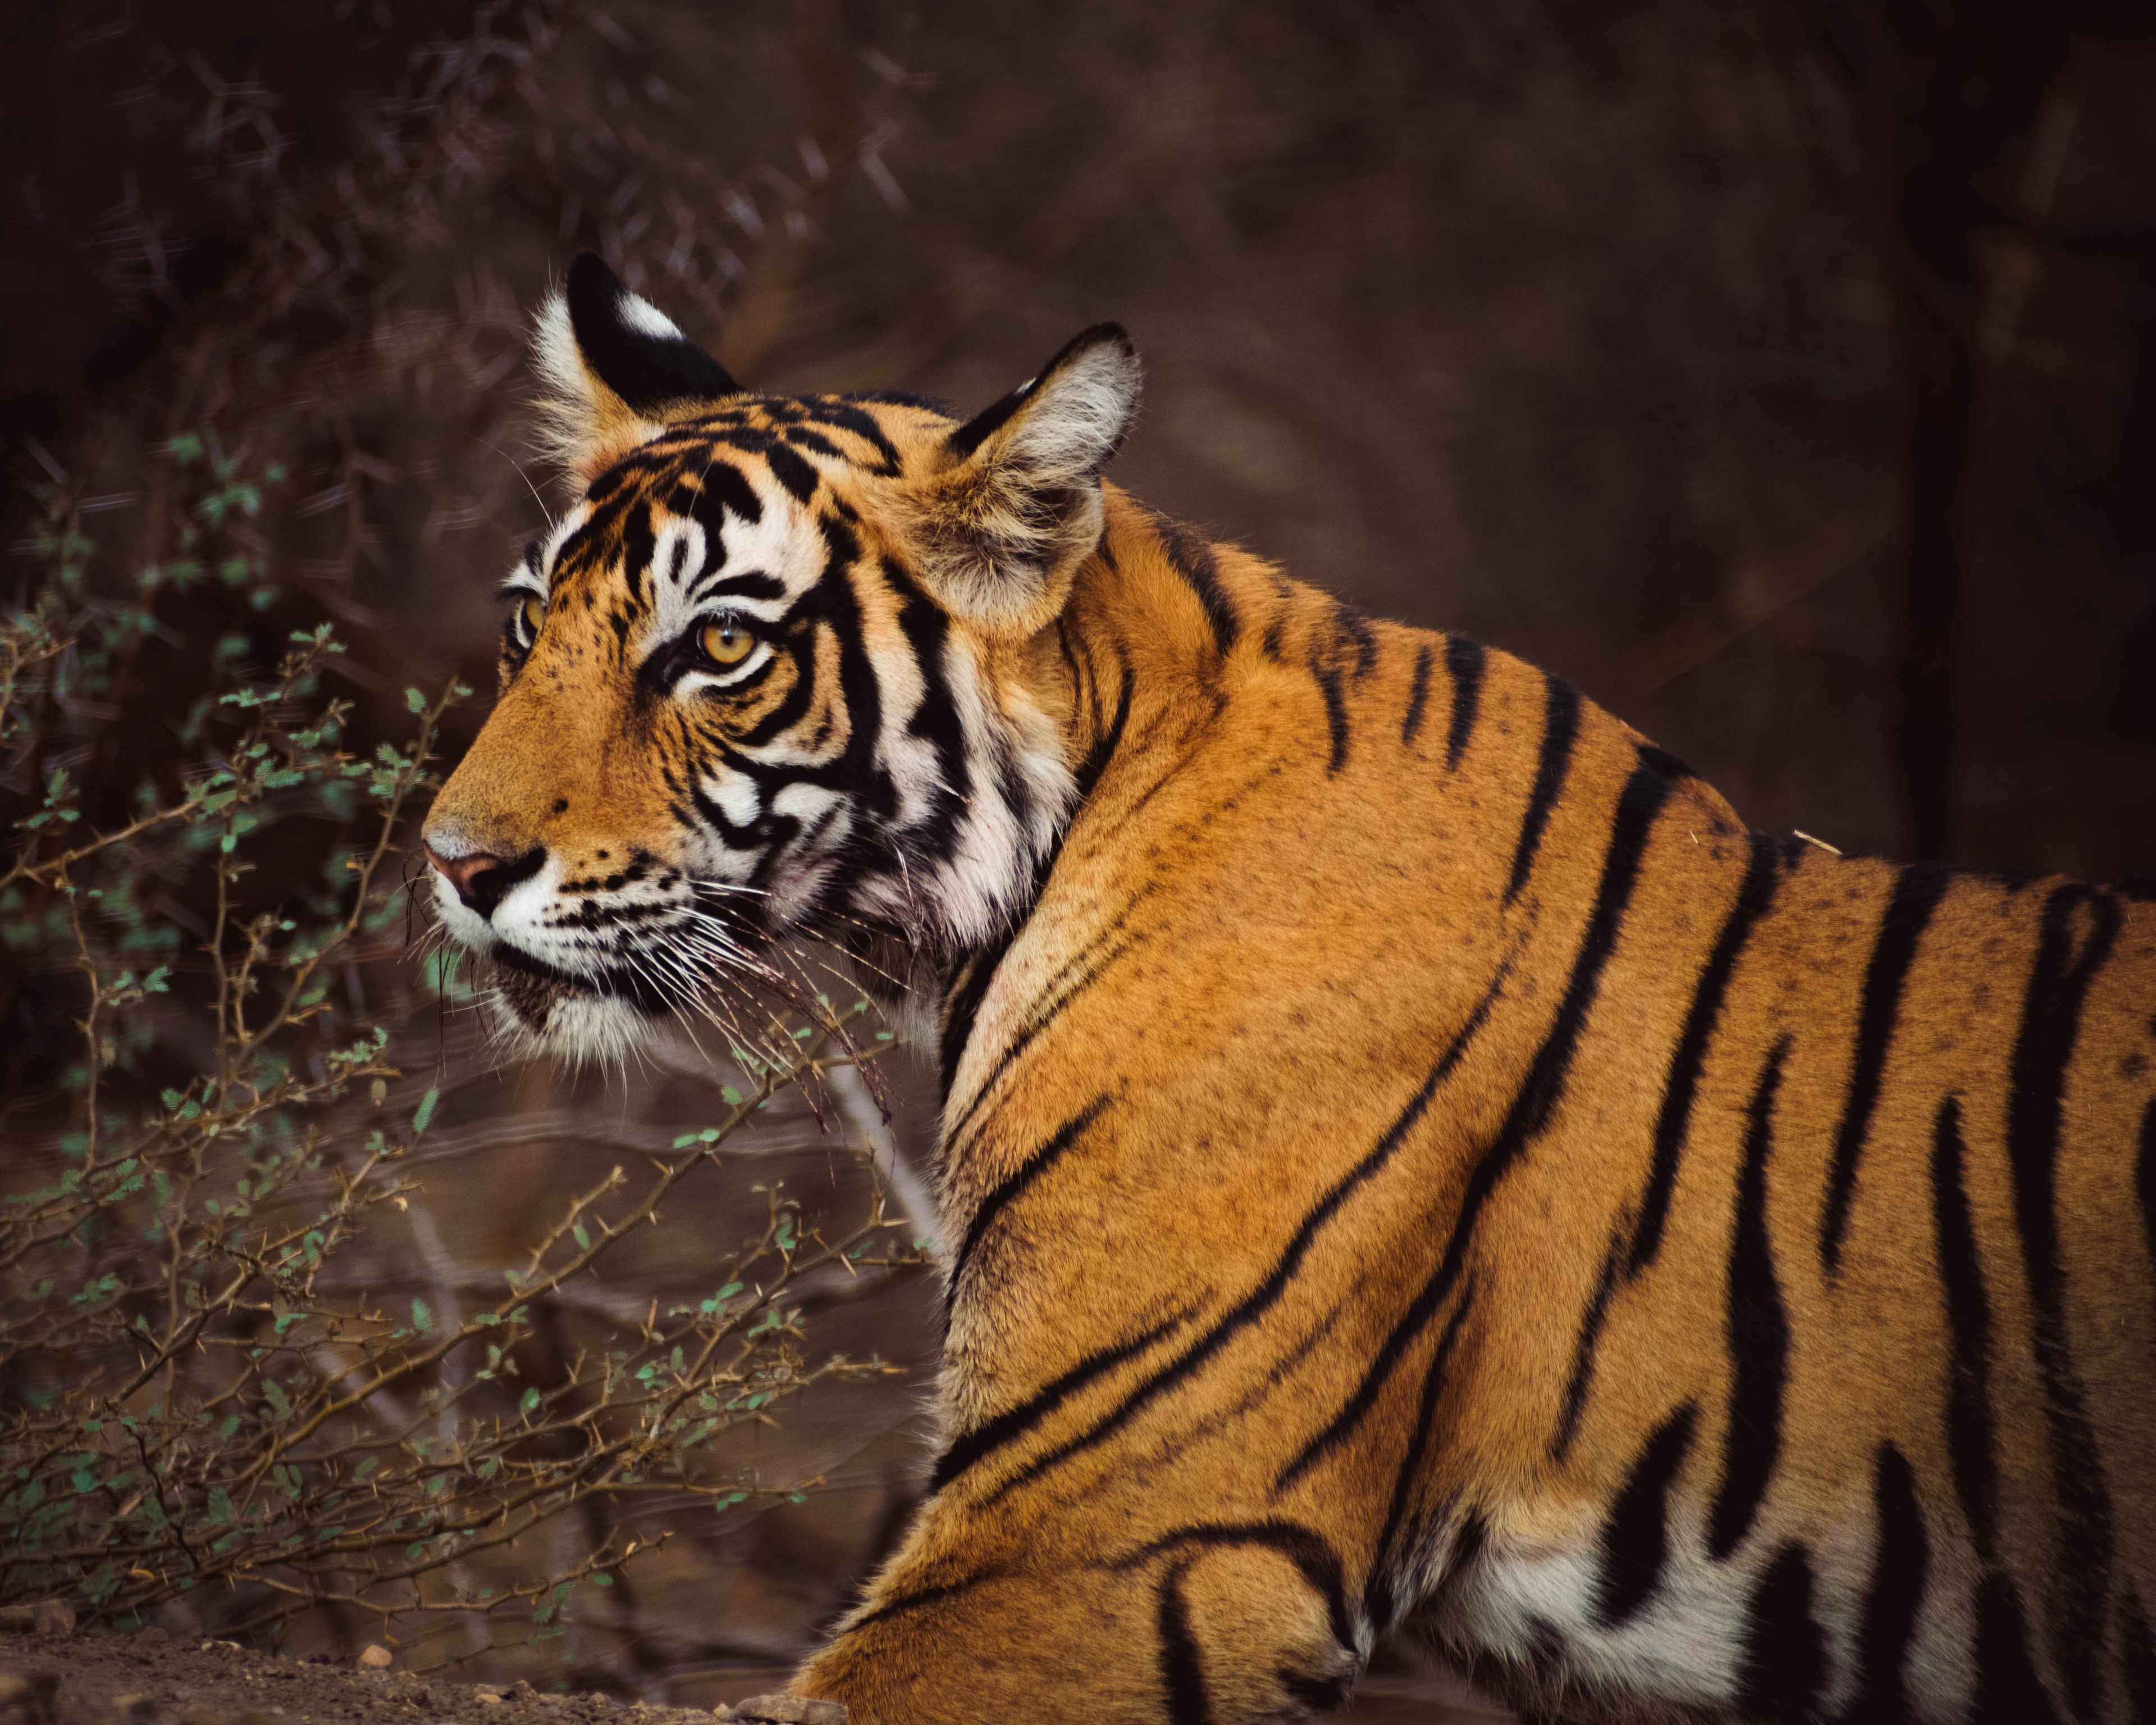 Jaipur to Ranthambore - A Helpful Travel Guide